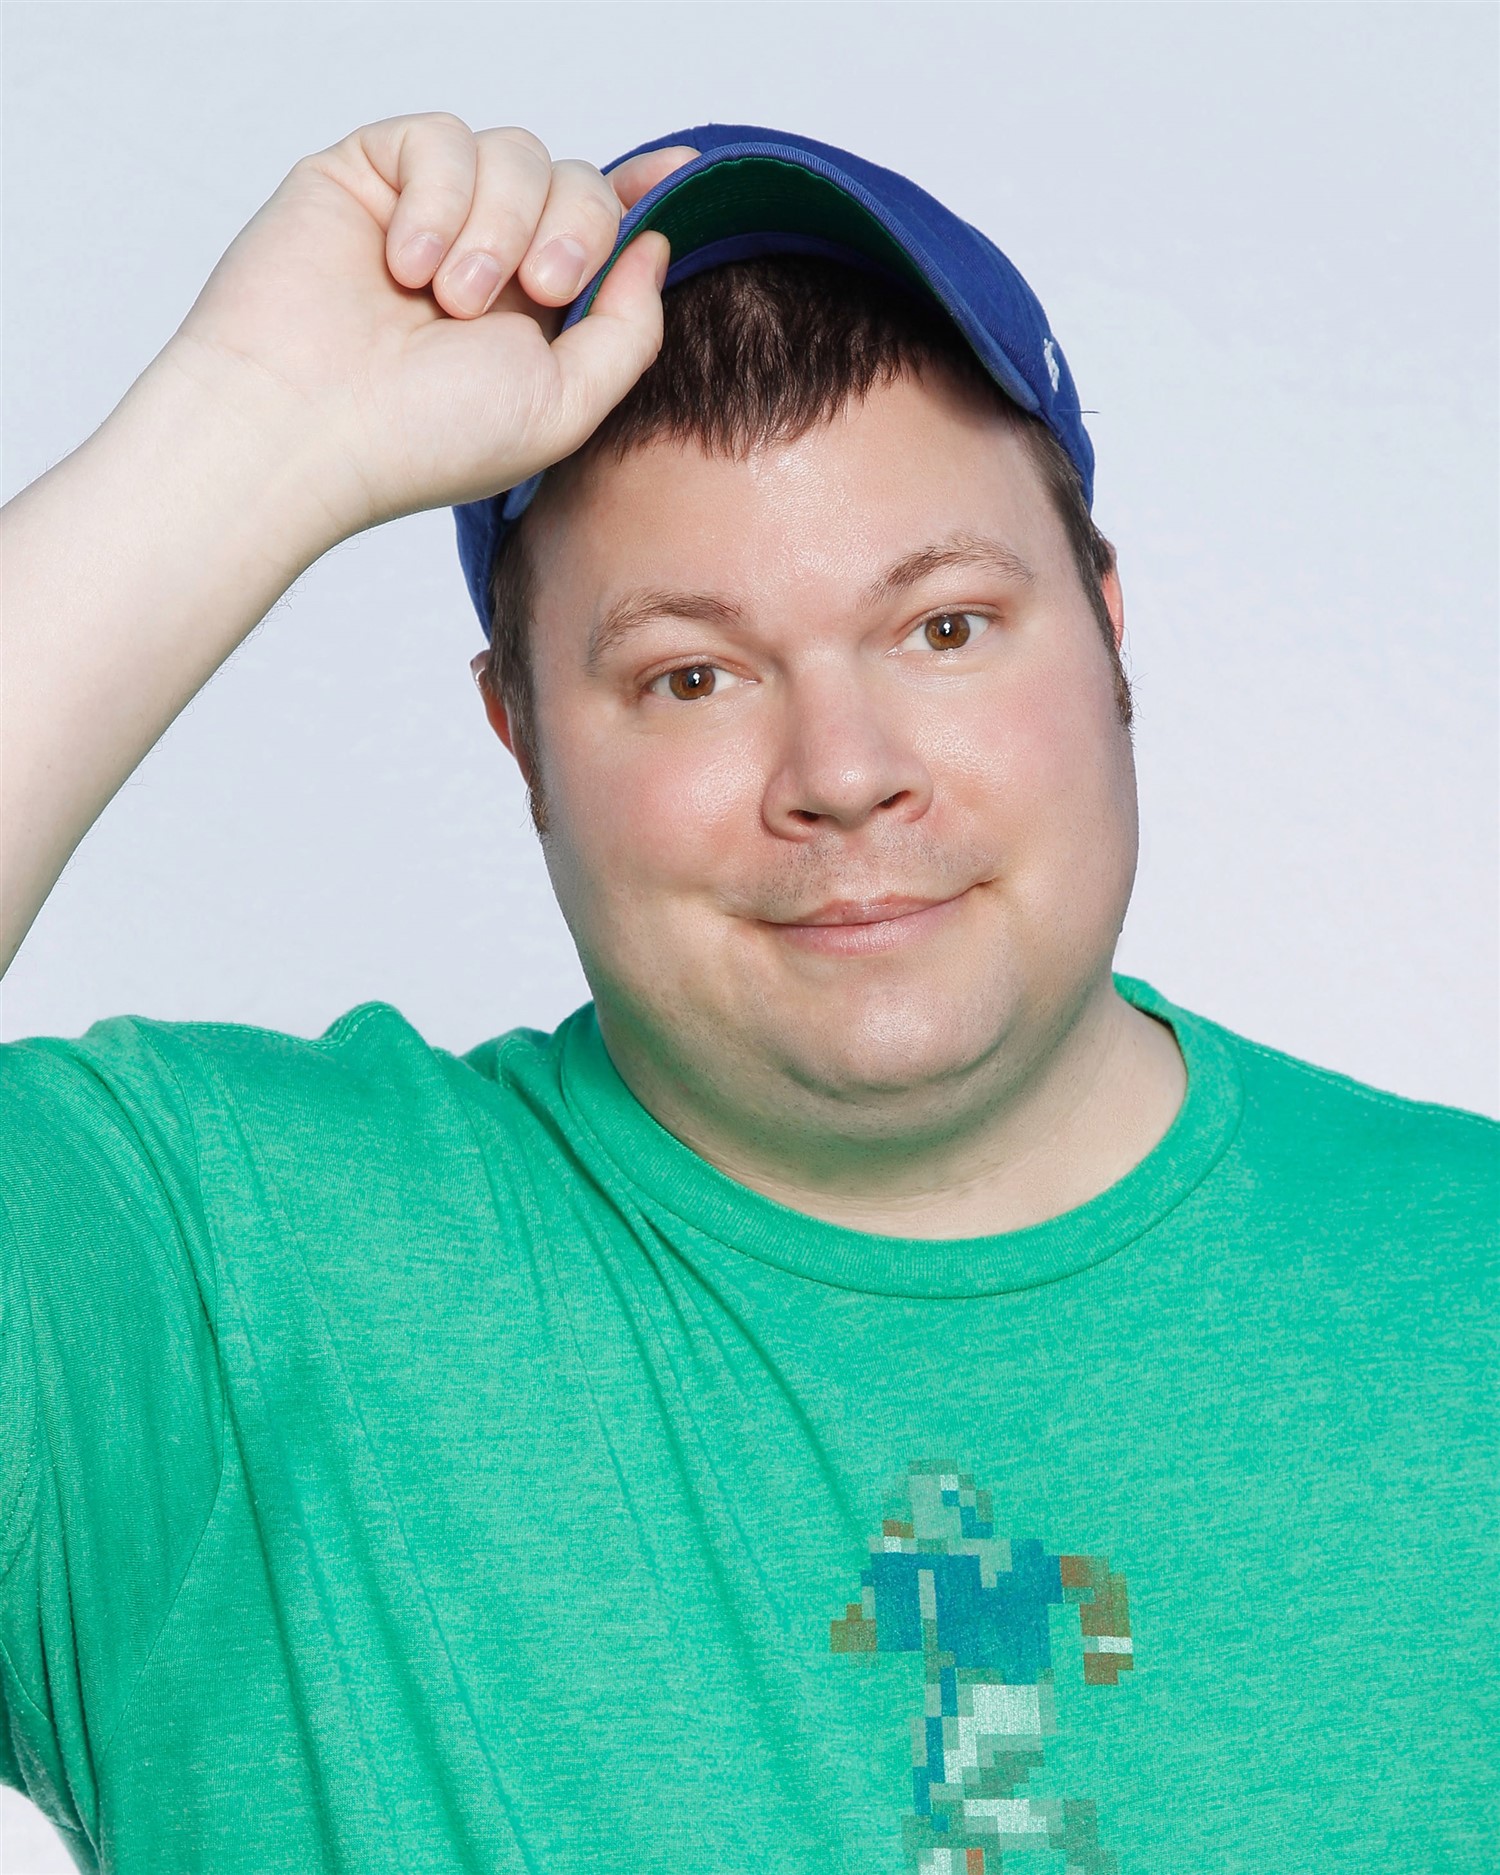 John Caparulo - Fri. at 9:30PM Funny Stop Comedy Club on Aug 25, 21:30@Funny Stop Comedy Club - Buy tickets and Get information on Funny Stop funnystop.online